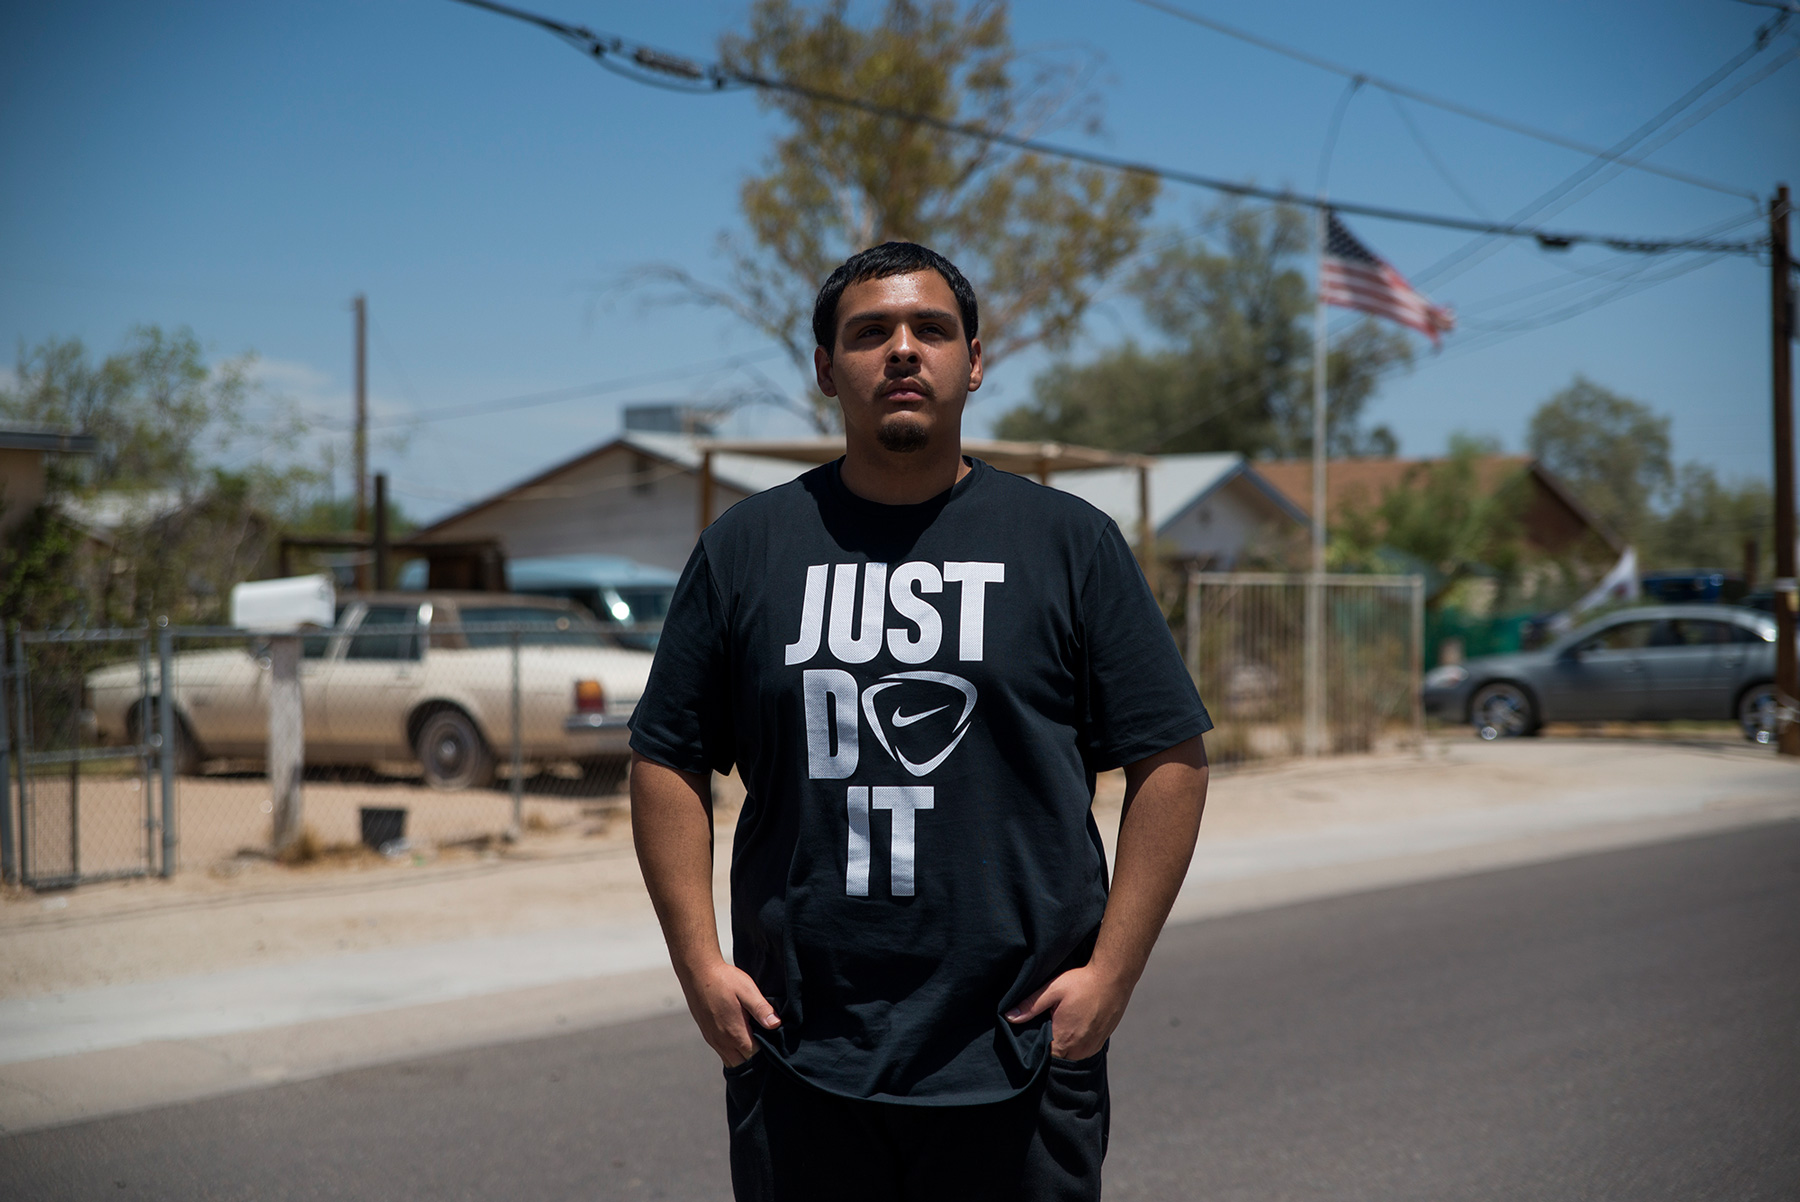 David Castorena, 24, of Chandler, Arizona, stands in the street of a small, largely Latino community in Arizona where he attends church. Castorena said he does not plan to vote in the November election because he thinks Donald Trump will win either way. (Roman Knertser/News21)